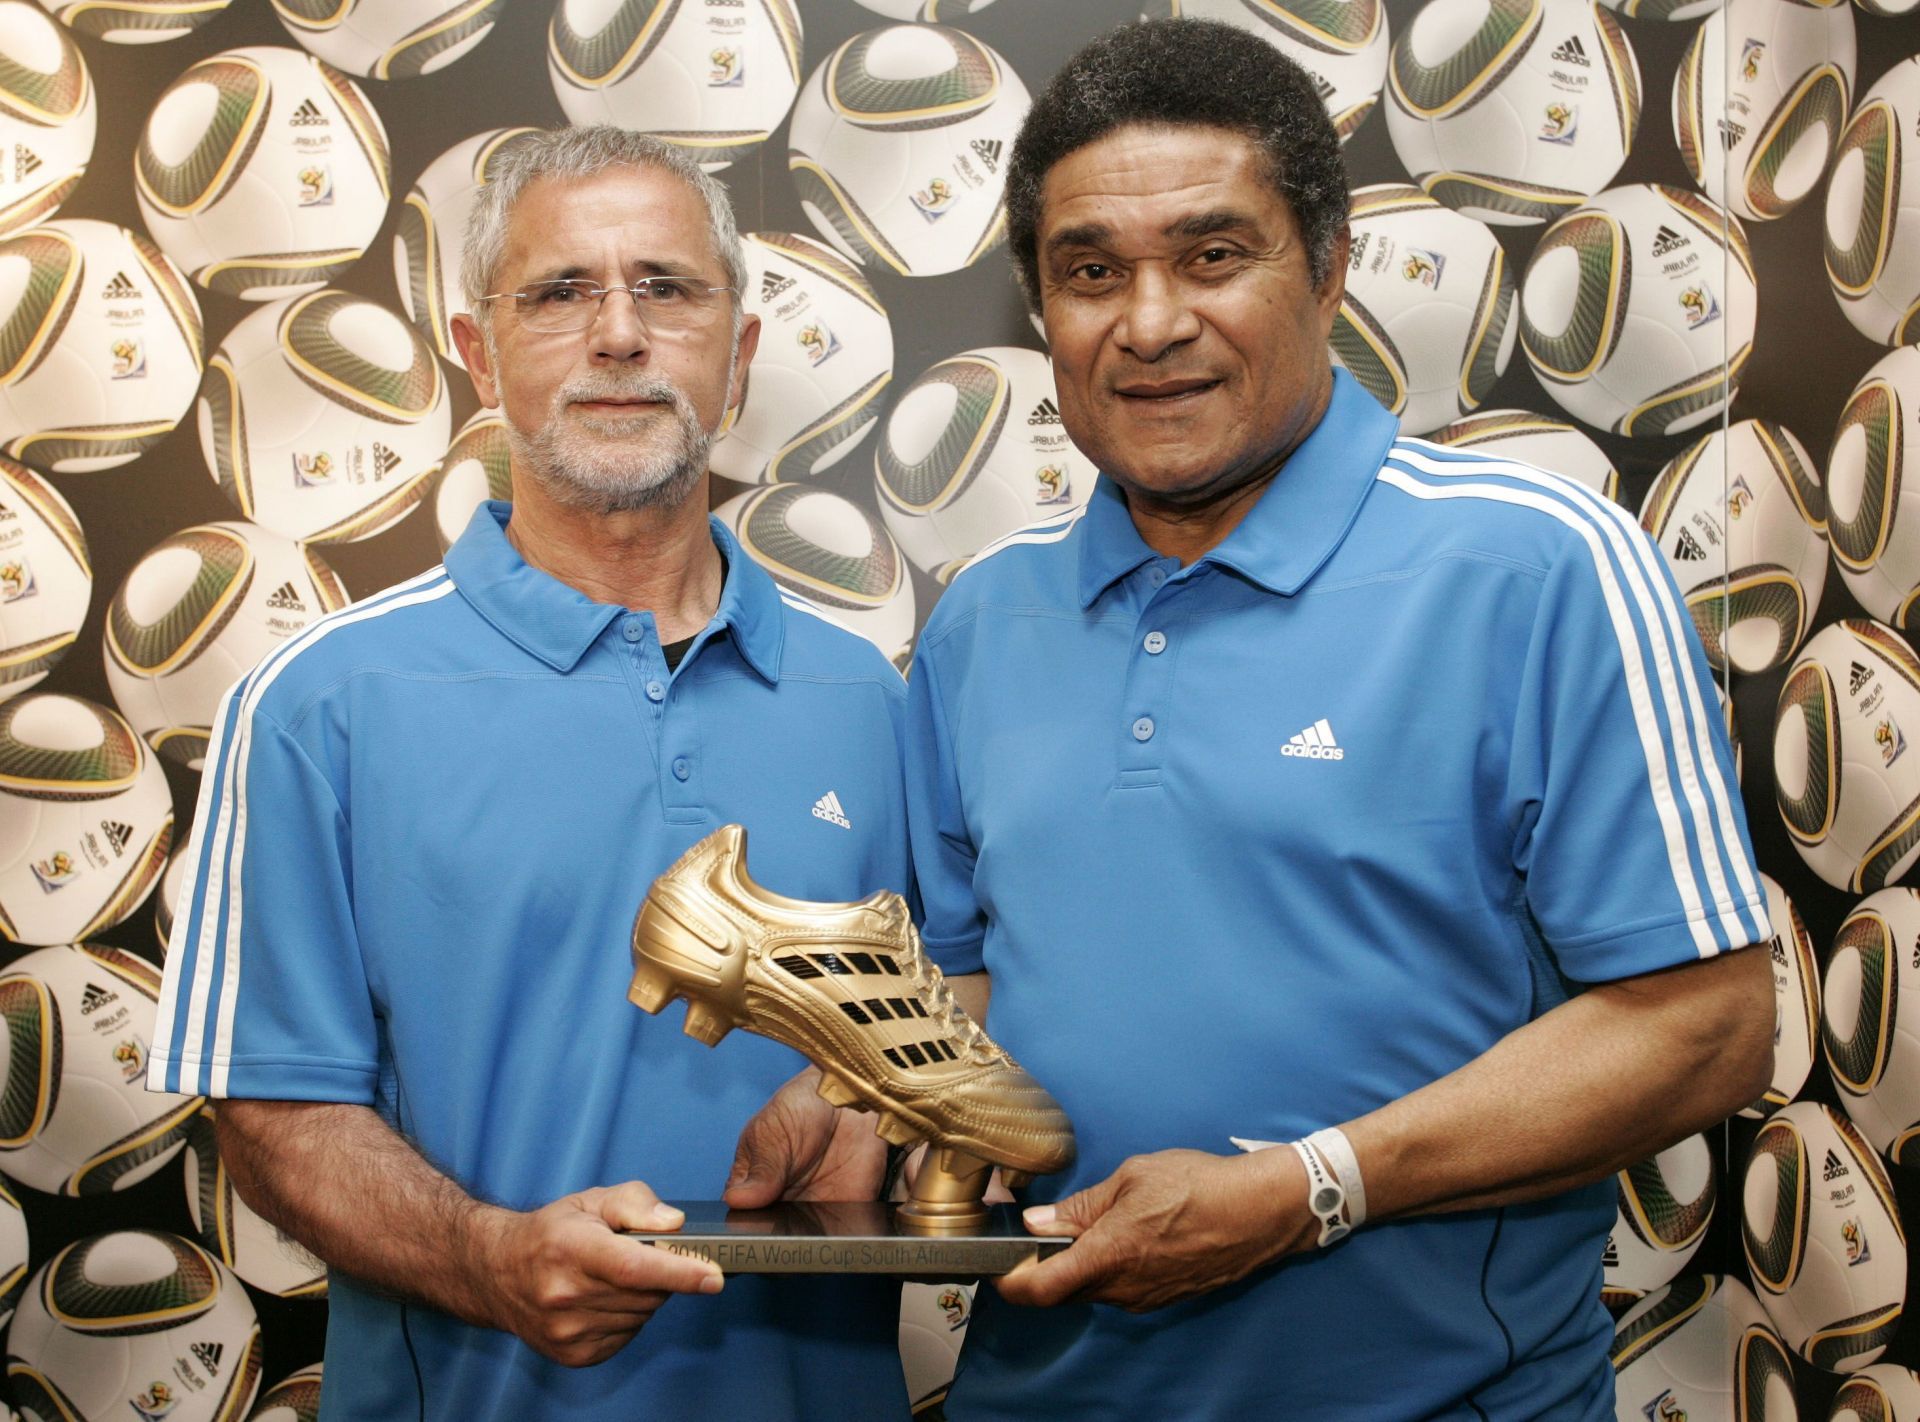 adidas Penalty Day/Golden Boot Event-2010 FIFA World Cup